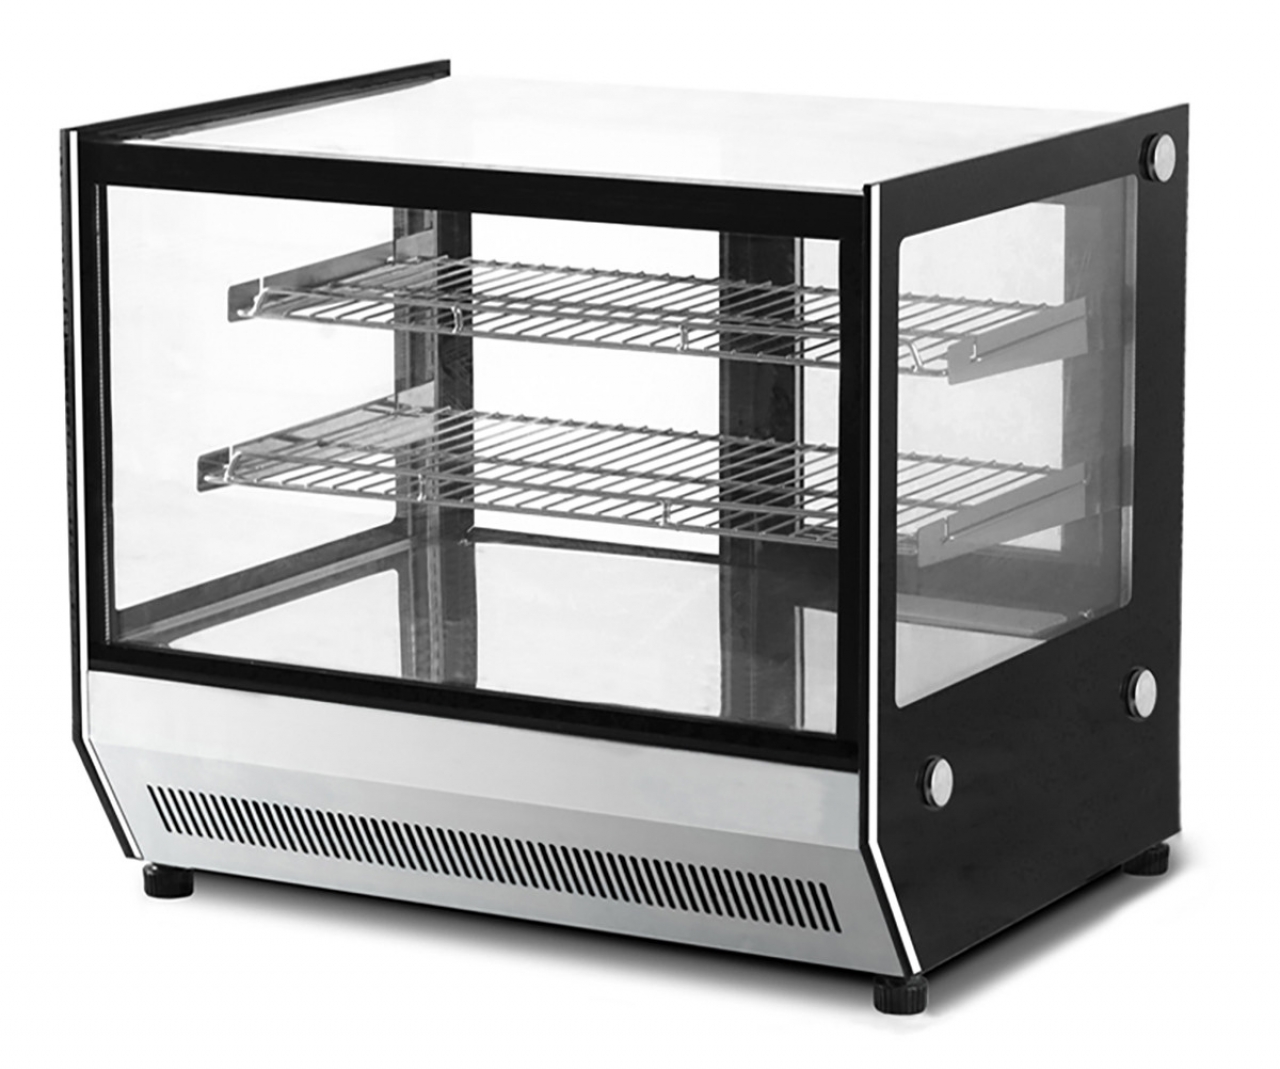 Refrigerated display case 2 shelves 202L